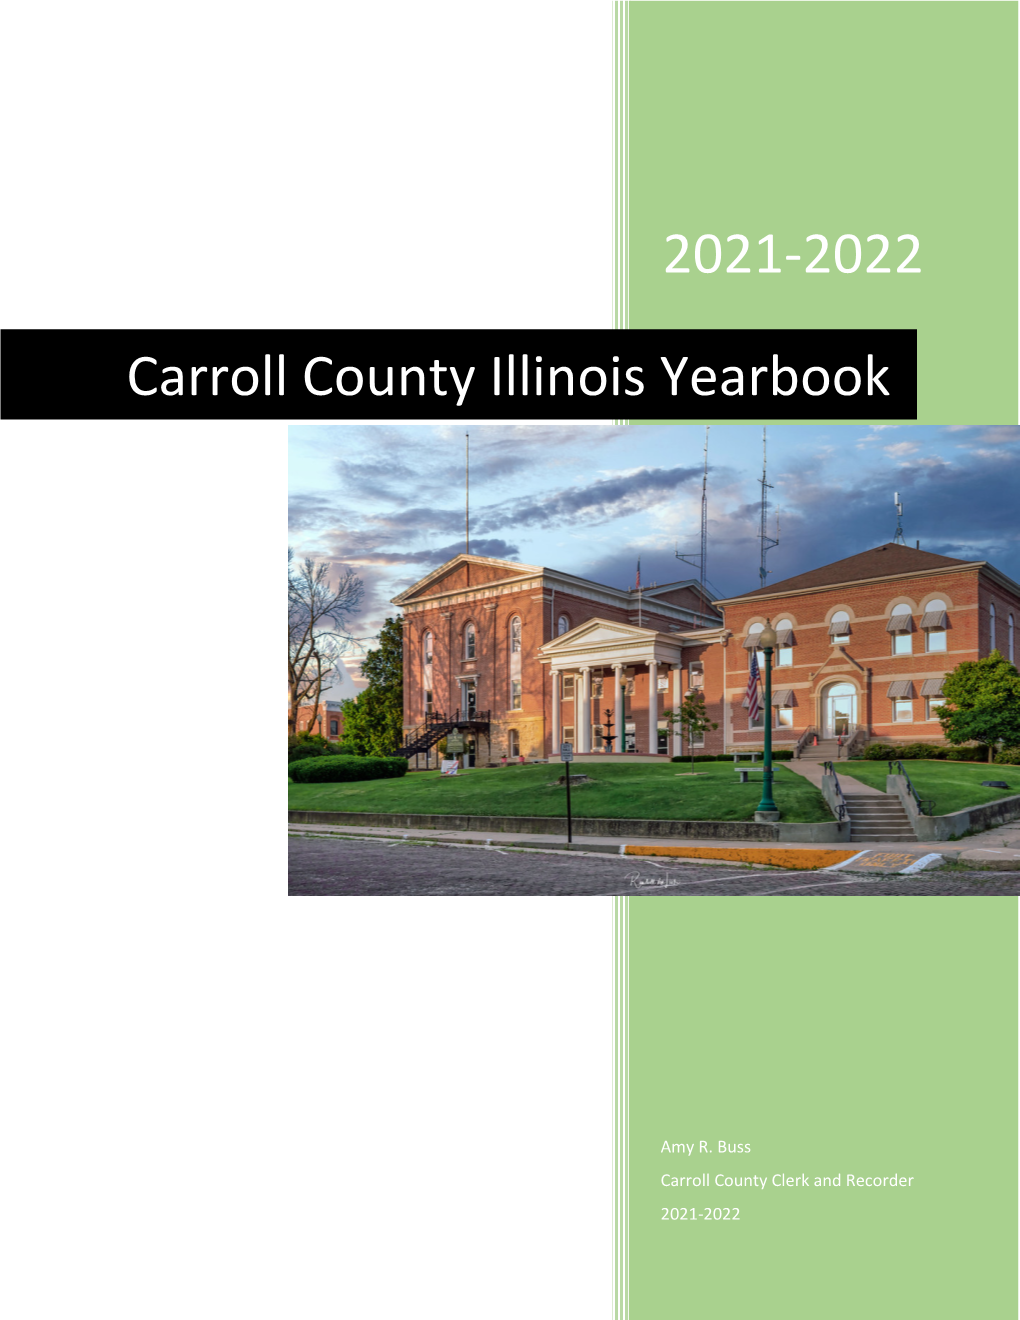 Carroll County Illinois Yearbook